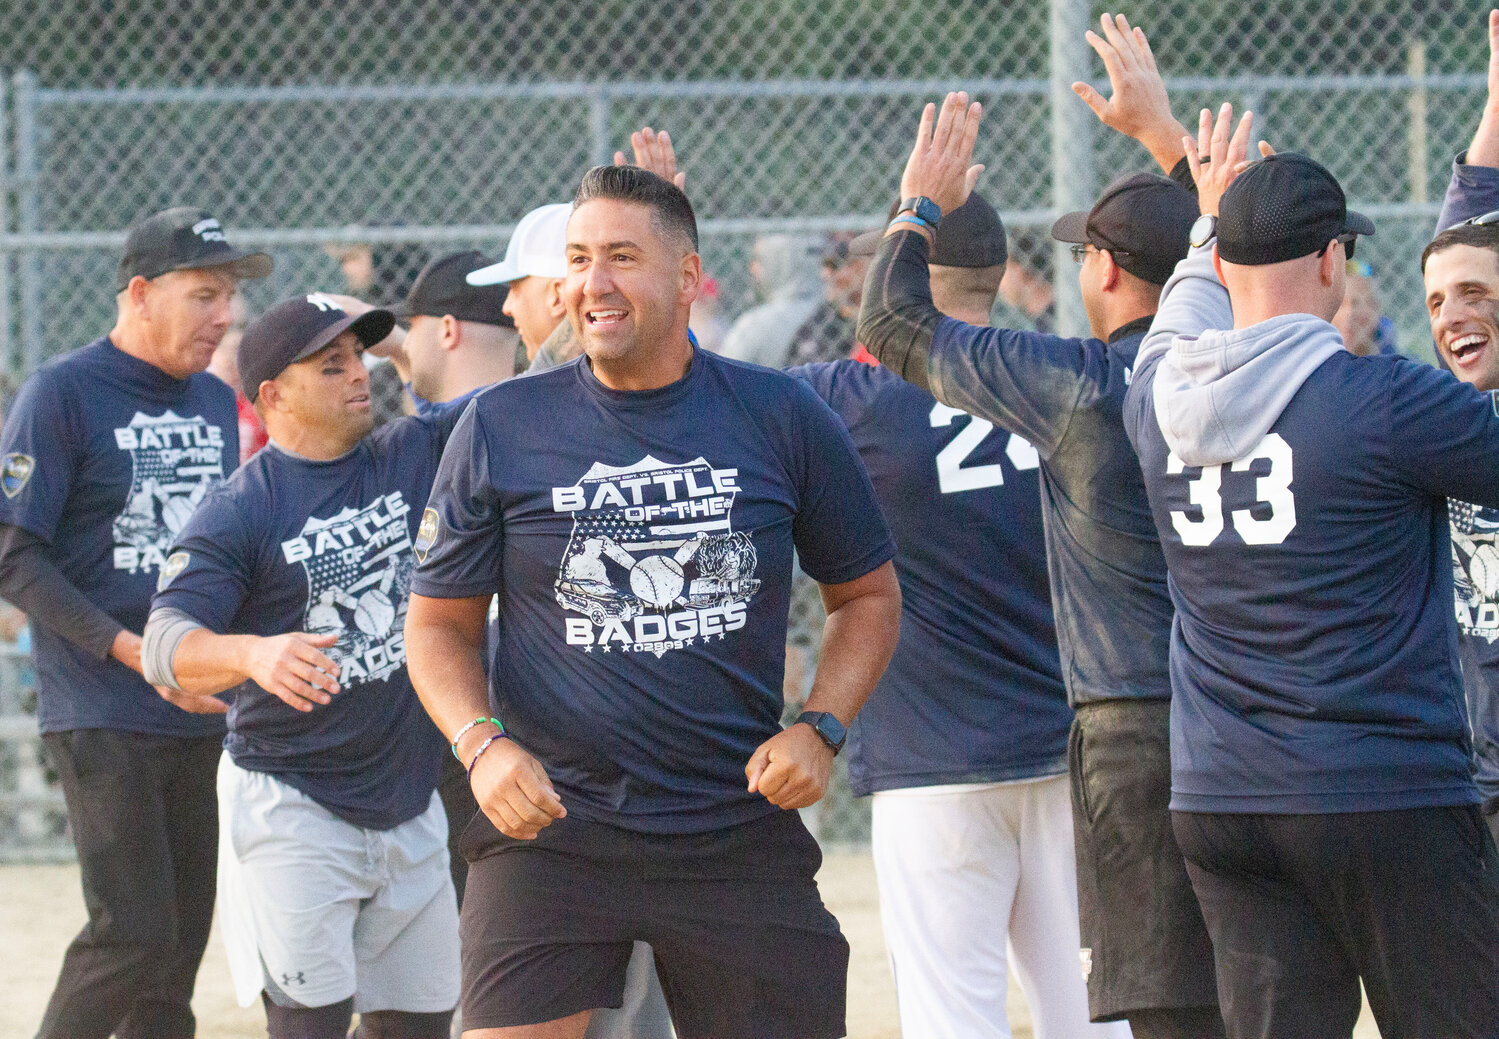 Michael Vieira and the police celebrate at home plater after Major Scott McNally came home for the winning run in the eight inning.